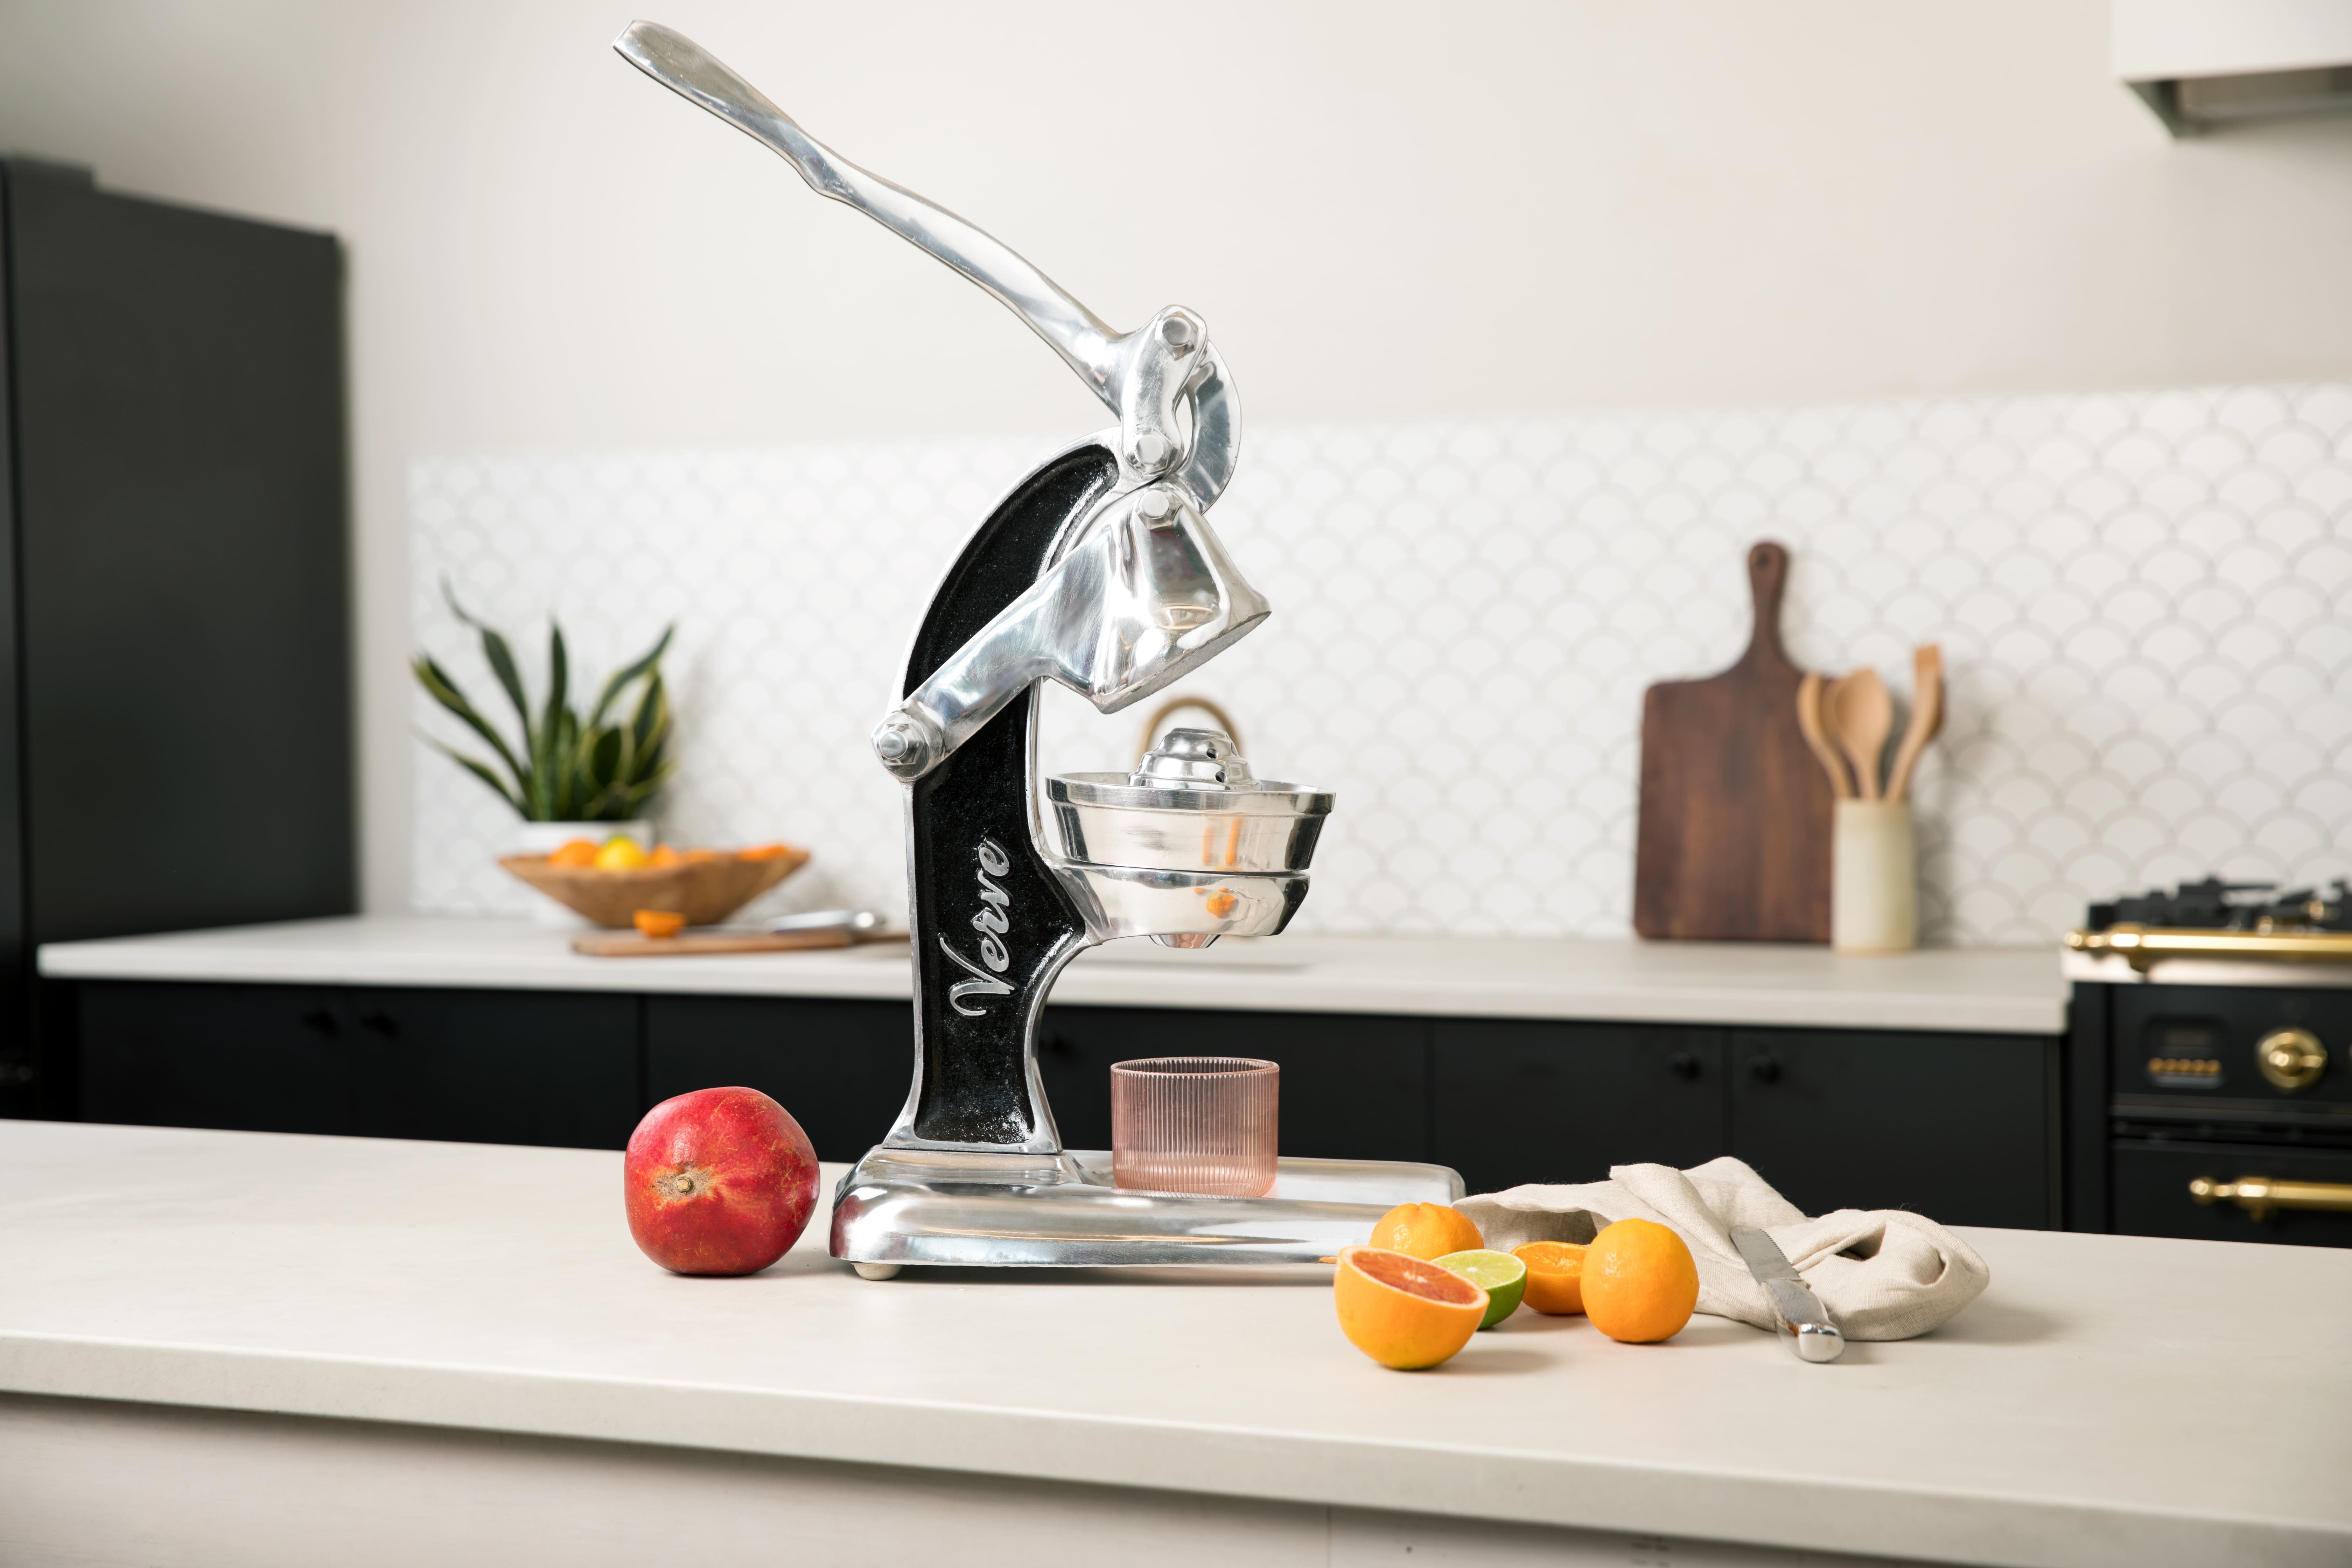 Artisan Citrus Hand Juicer - Large - From Mexico